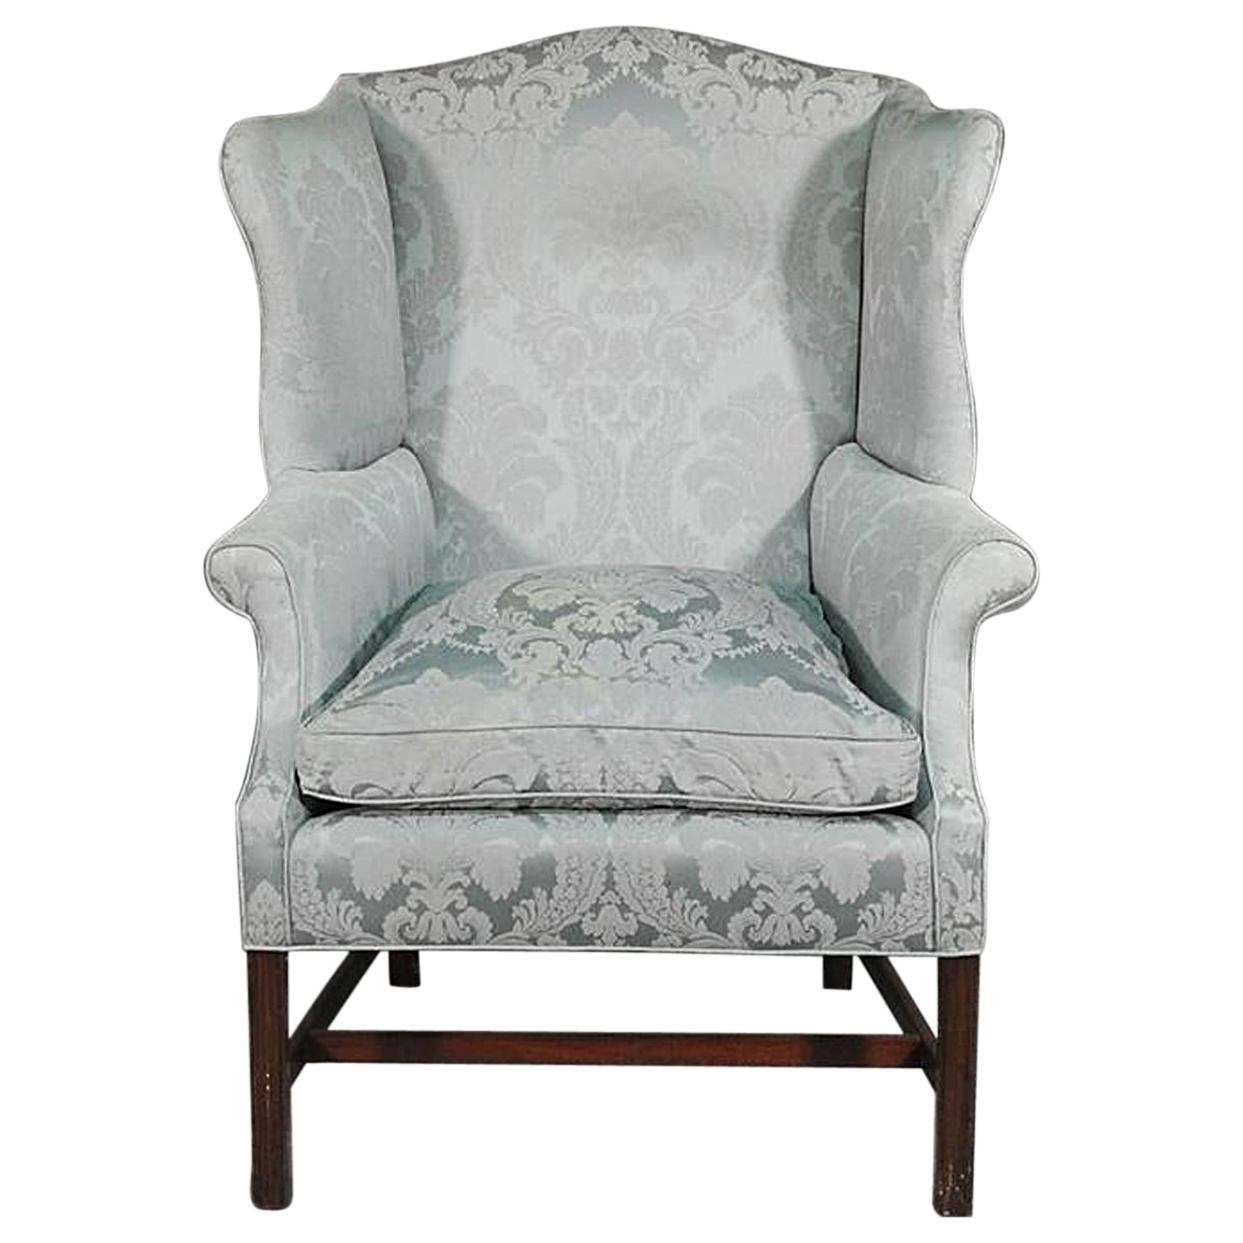 New England Style Mahogany Hepplewhite Wing Chair with Damask Upholstery